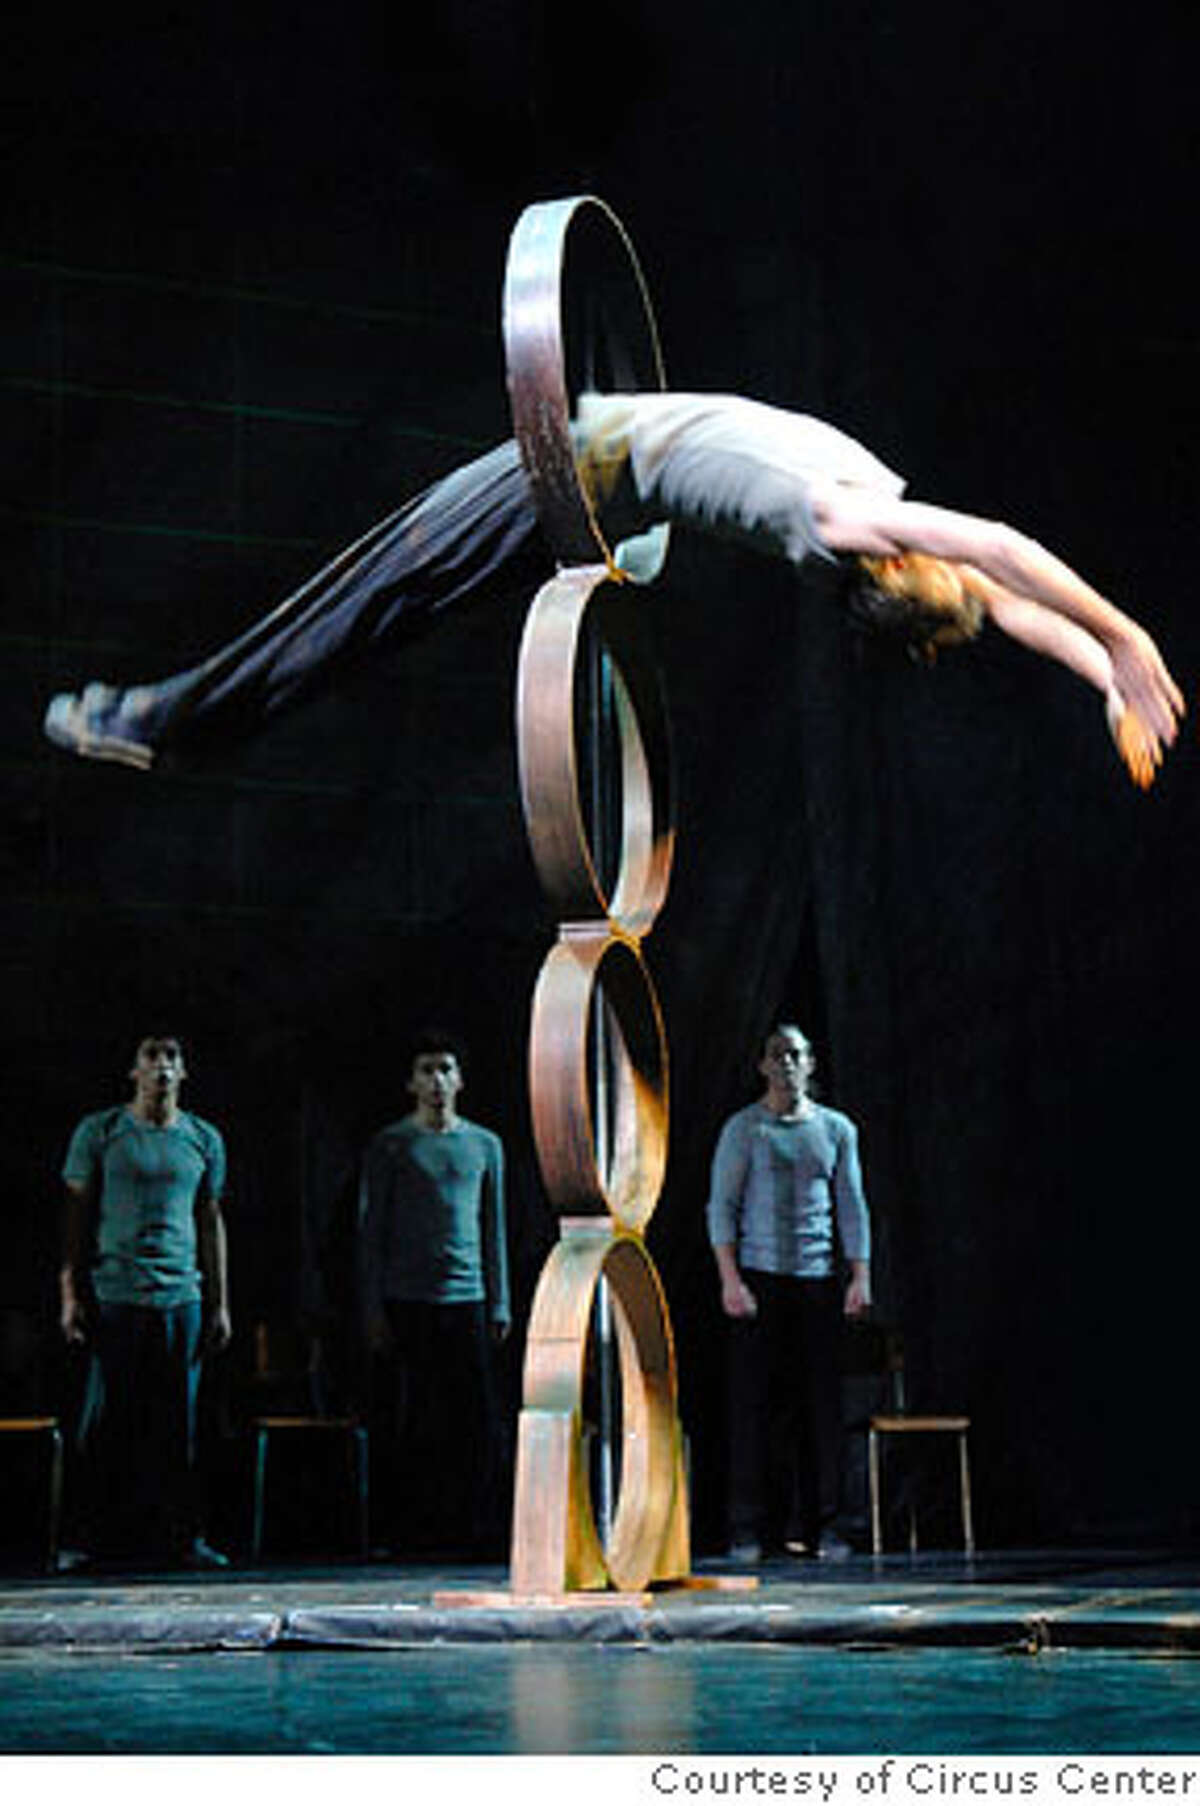 Will Underwood in a four-high hoop diving act Photo courtesy: Circus Center